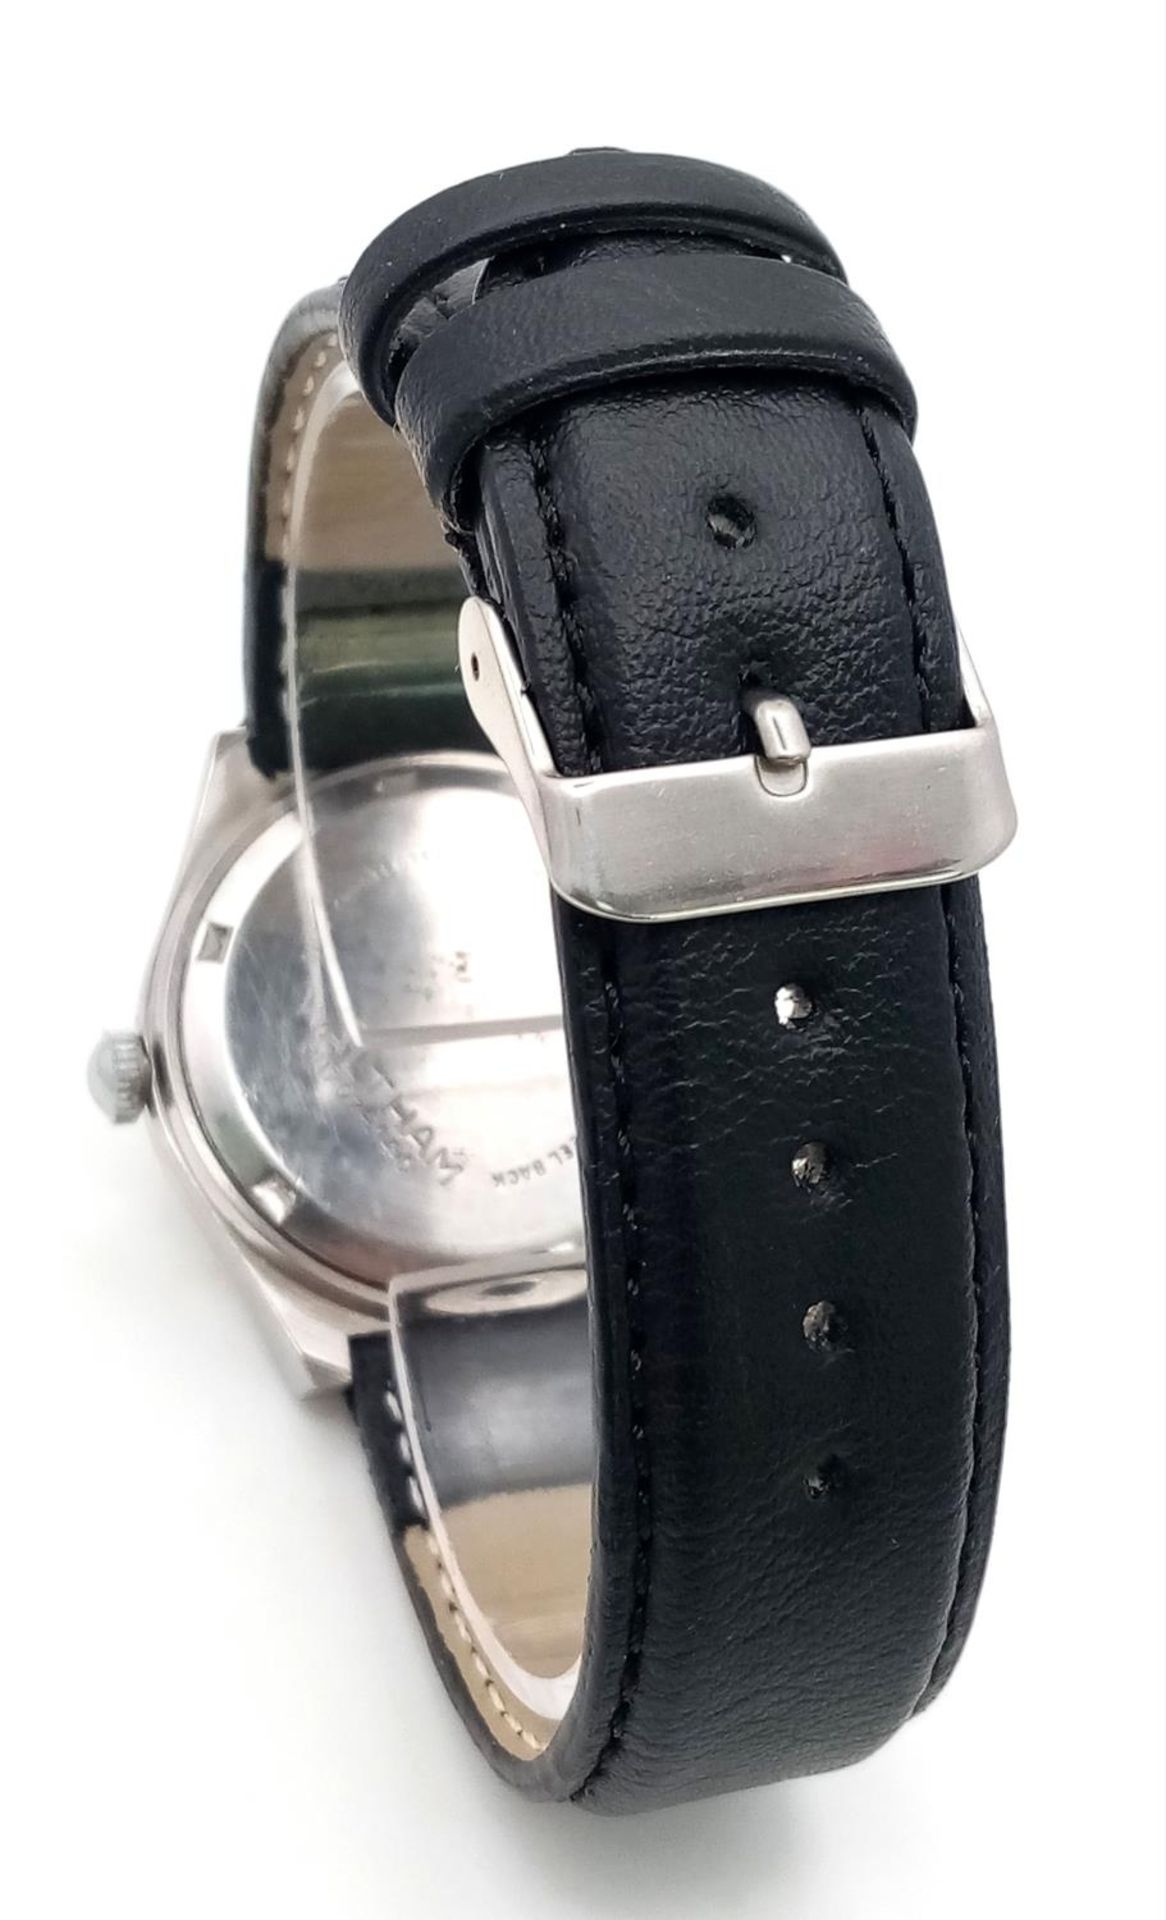 A Vintage Waltham 17 Jewel Automatic Gents Watch. Black leather strap. Stainless steel case - - Image 5 of 6